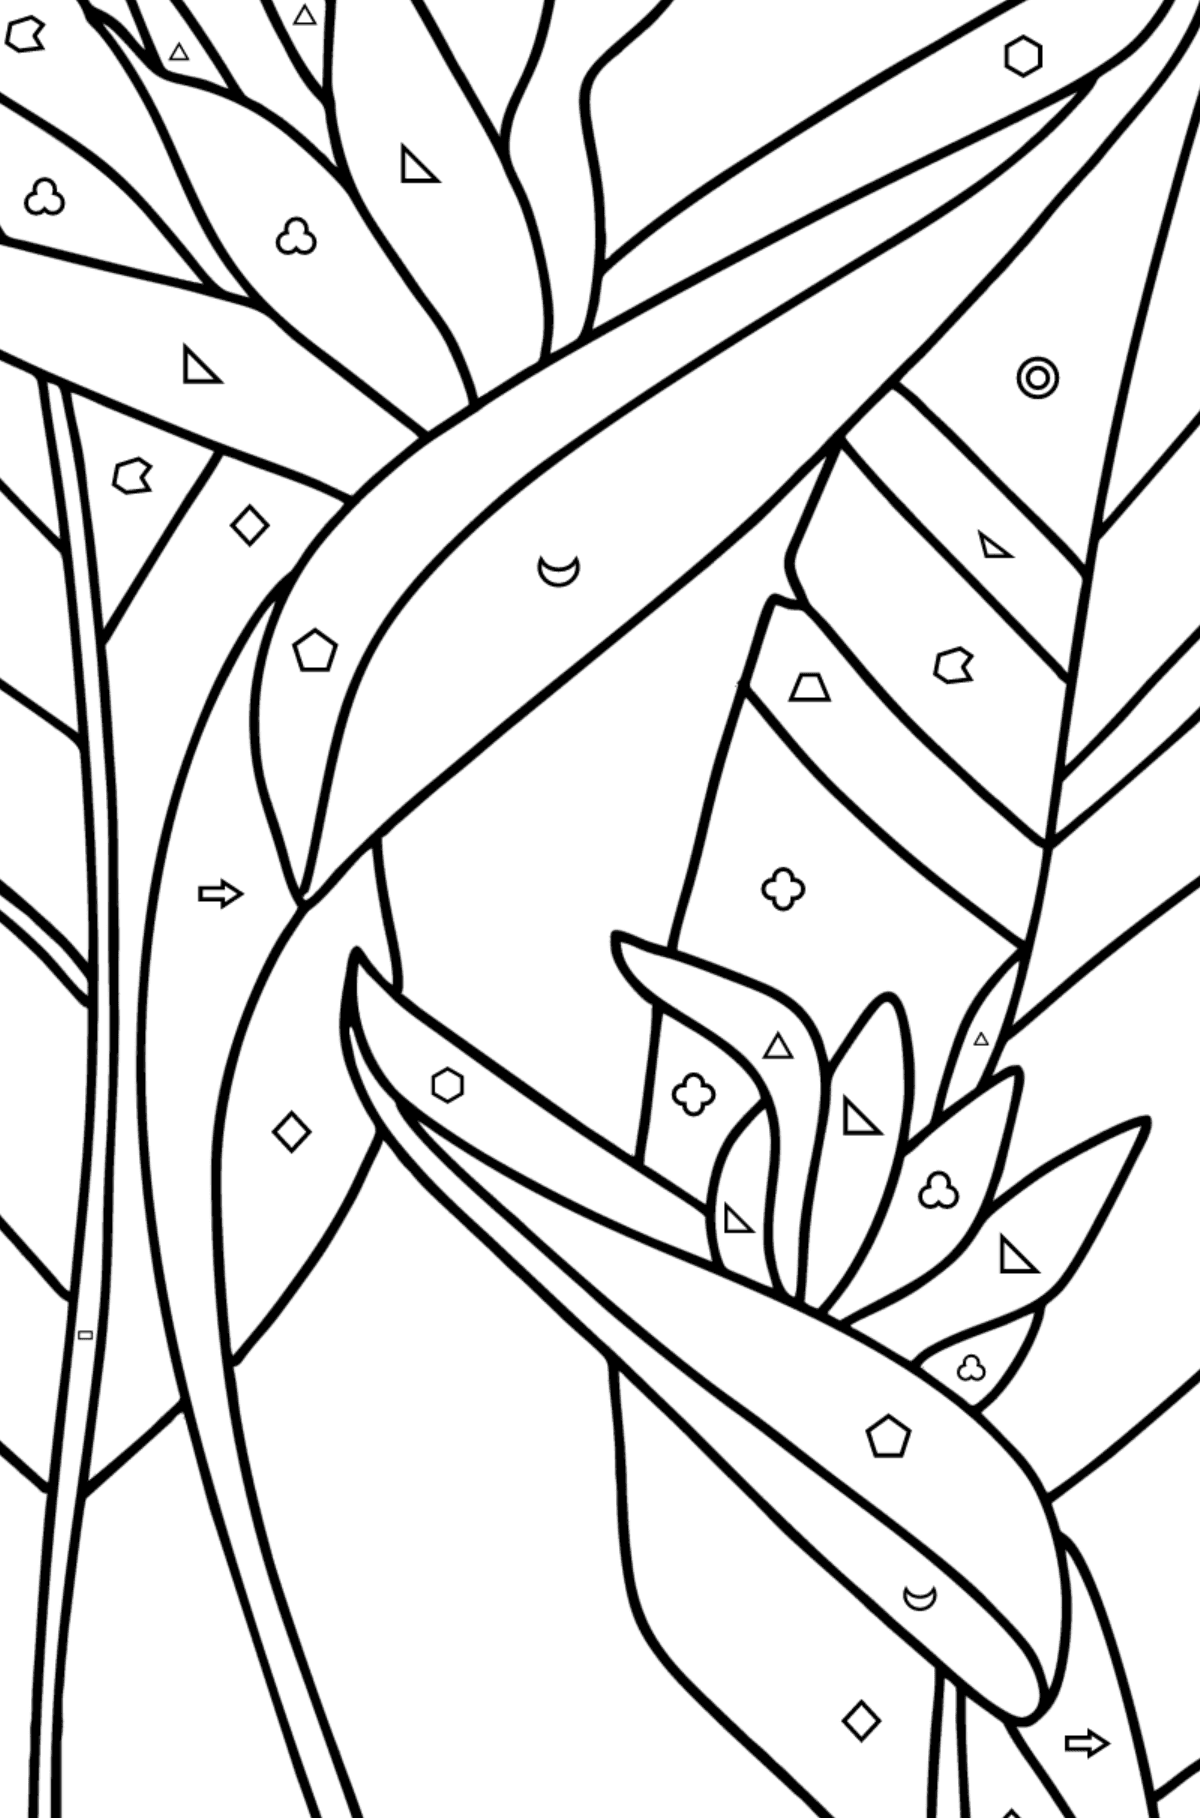 Strelitzia coloring page - Coloring by Geometric Shapes for Kids